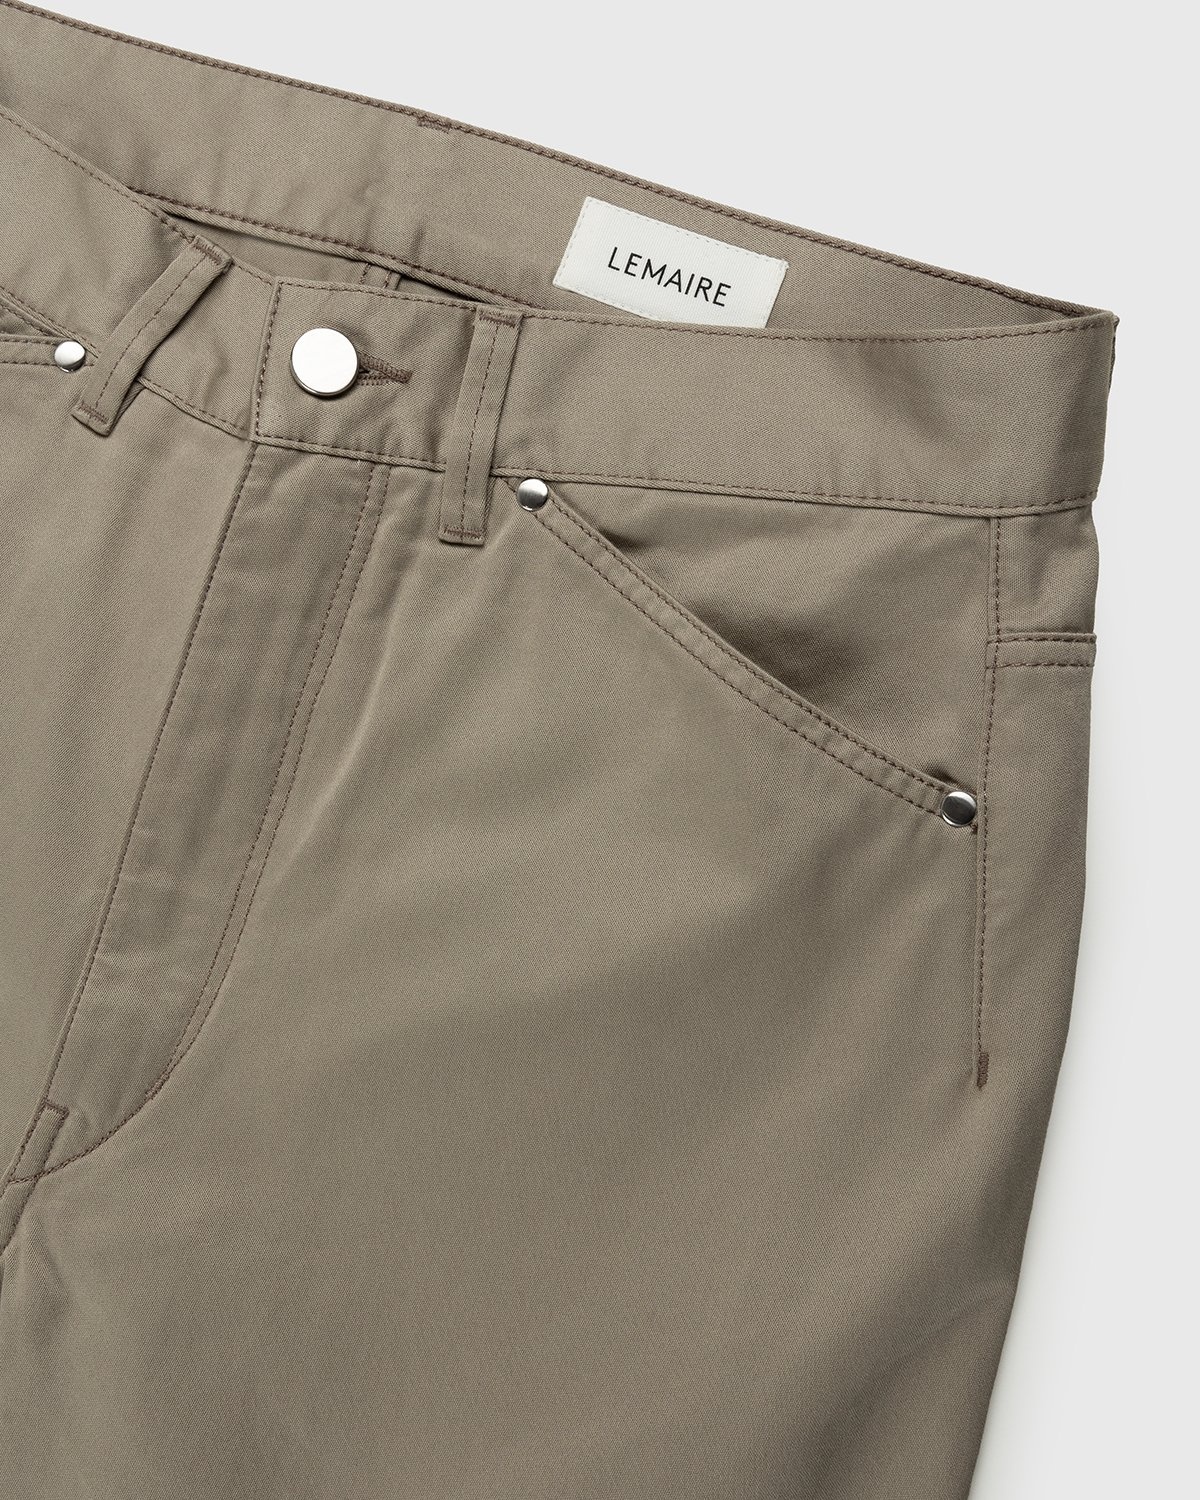 Lemaire – Seamless Pants Light Taupe - Trousers - Beige - Image 4